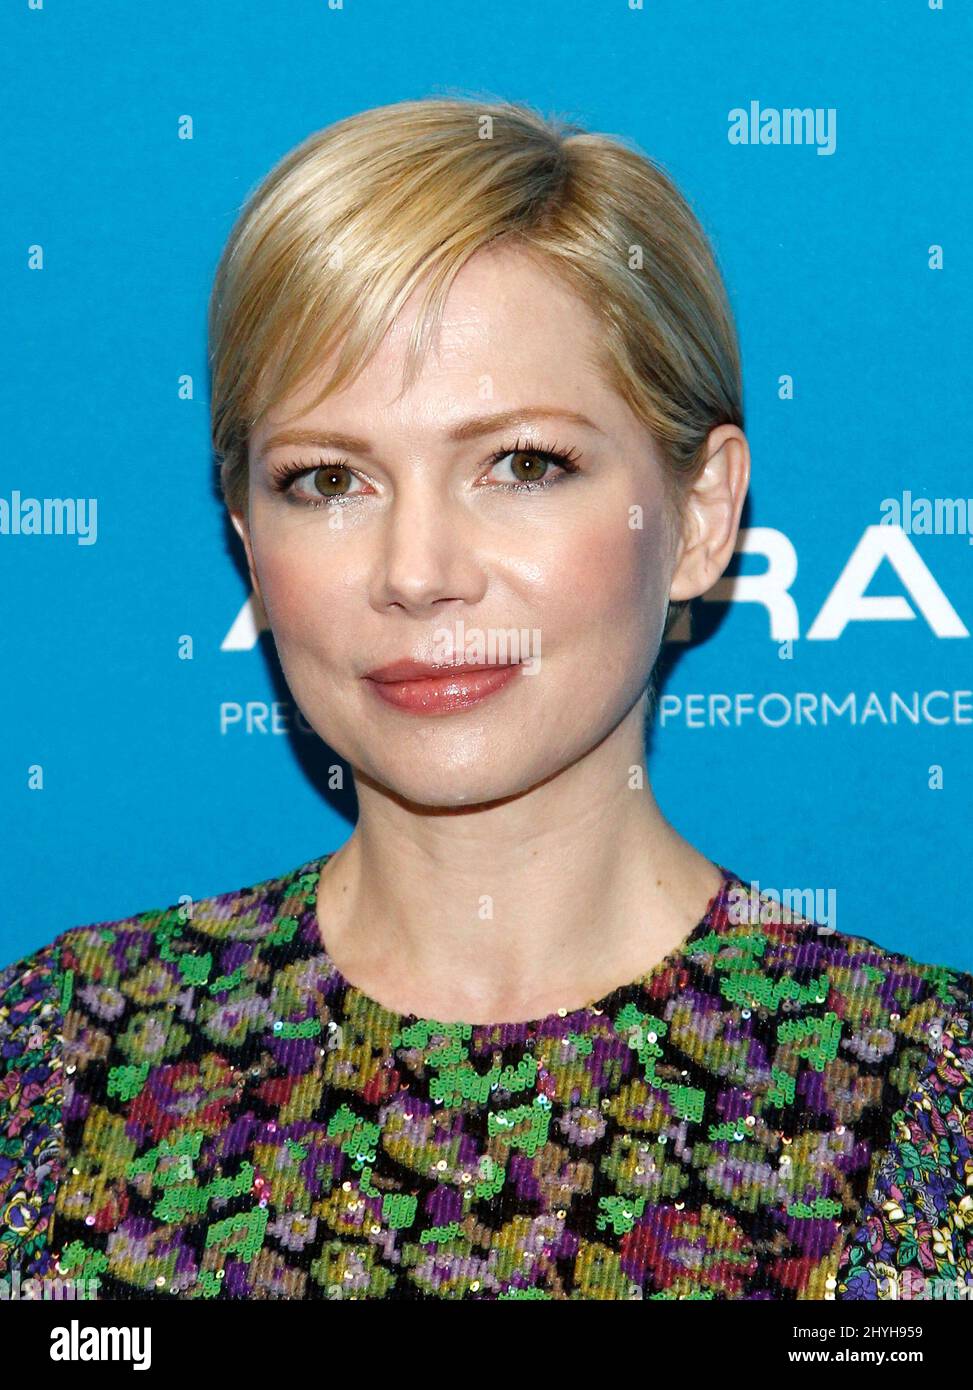 Michelle Williams at the premiere of 'After The Wedding' during the 2019 Sundance Film Festival held at the Eccles Theatre on January 24, 2019 in Park City, UT. Stock Photo